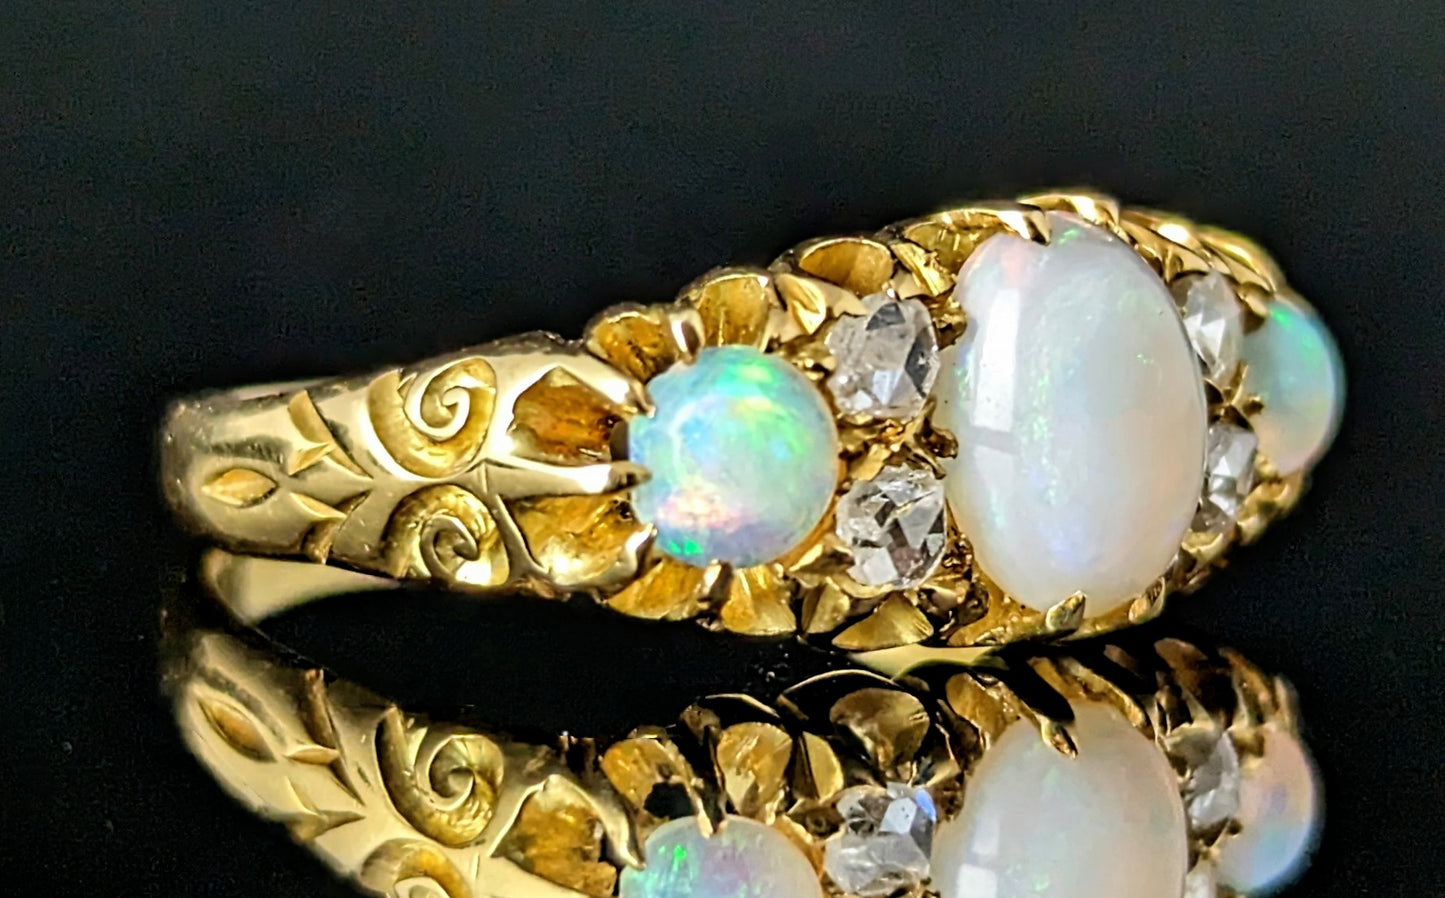 Antique Opal and Diamond ring, 18ct yellow gold, Edwardian